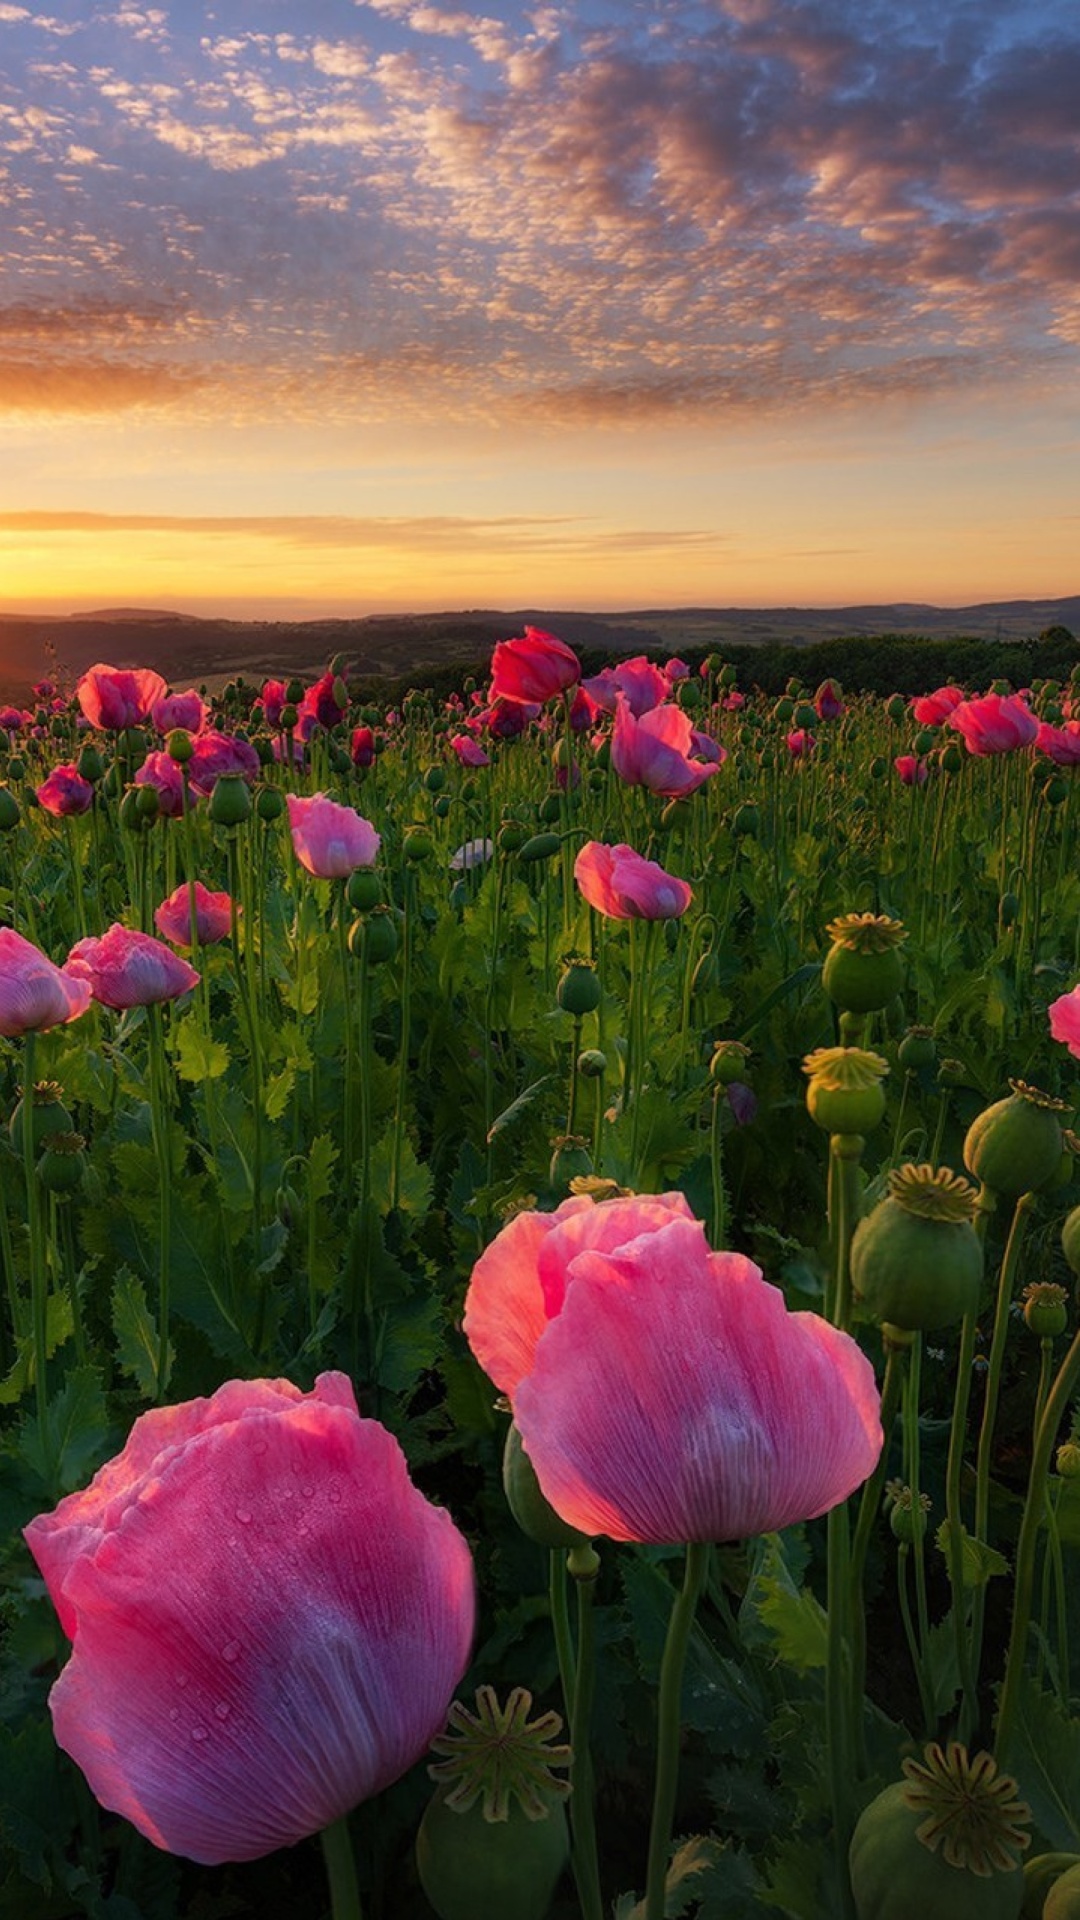 Poppies in Thuringia, Germany screenshot #1 1080x1920